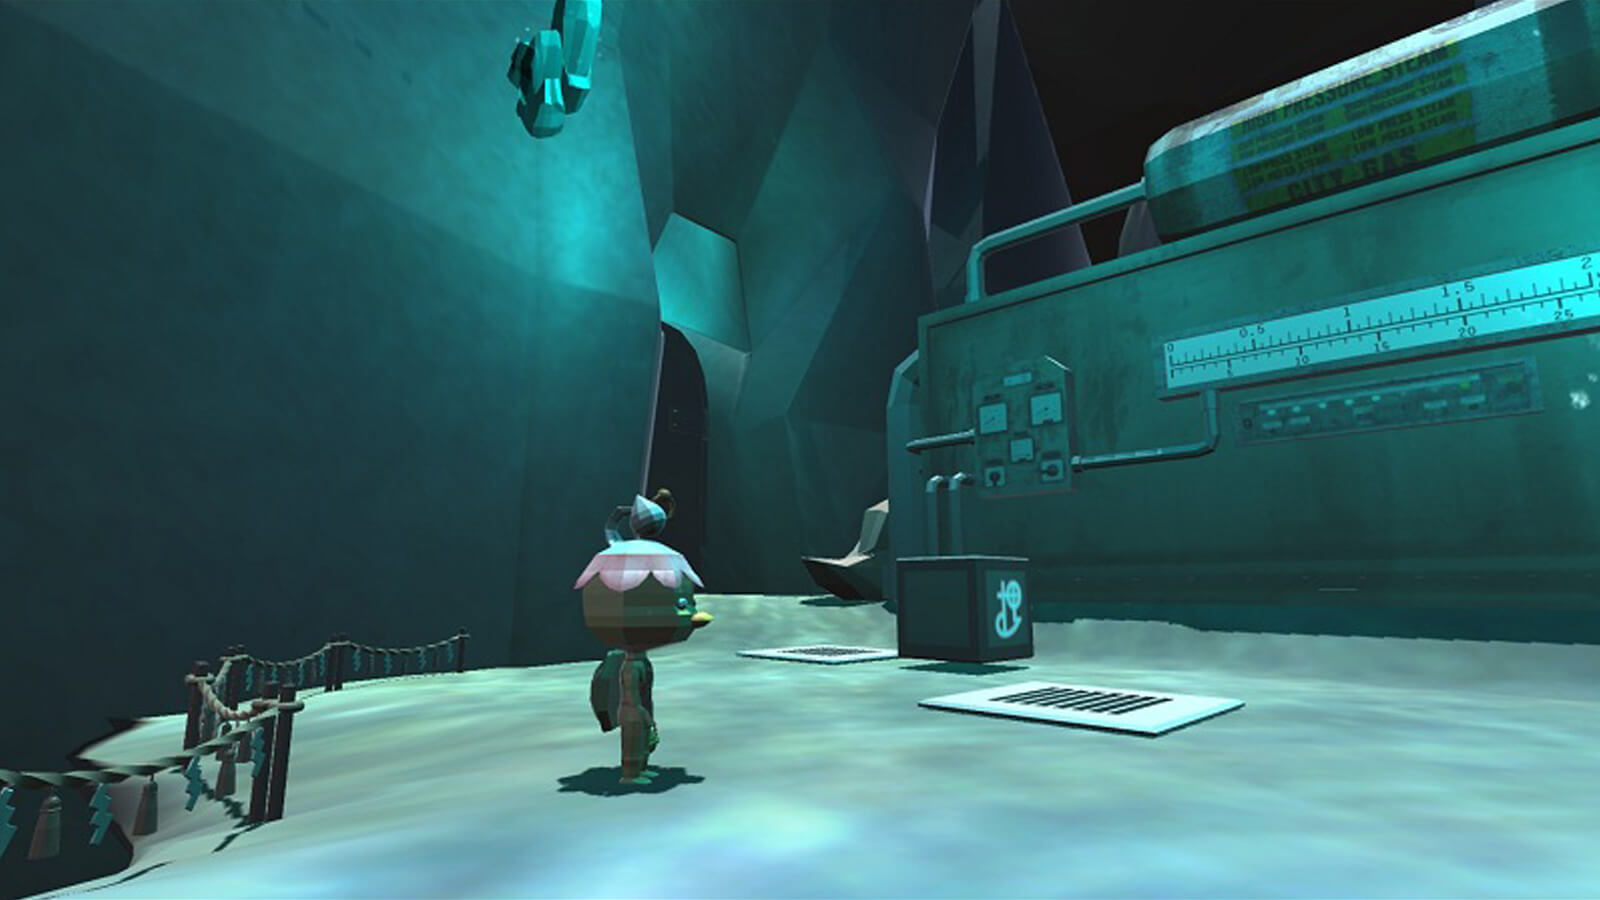 The kappa character stands in a dimly lit chamber with a large machine sitting nearby